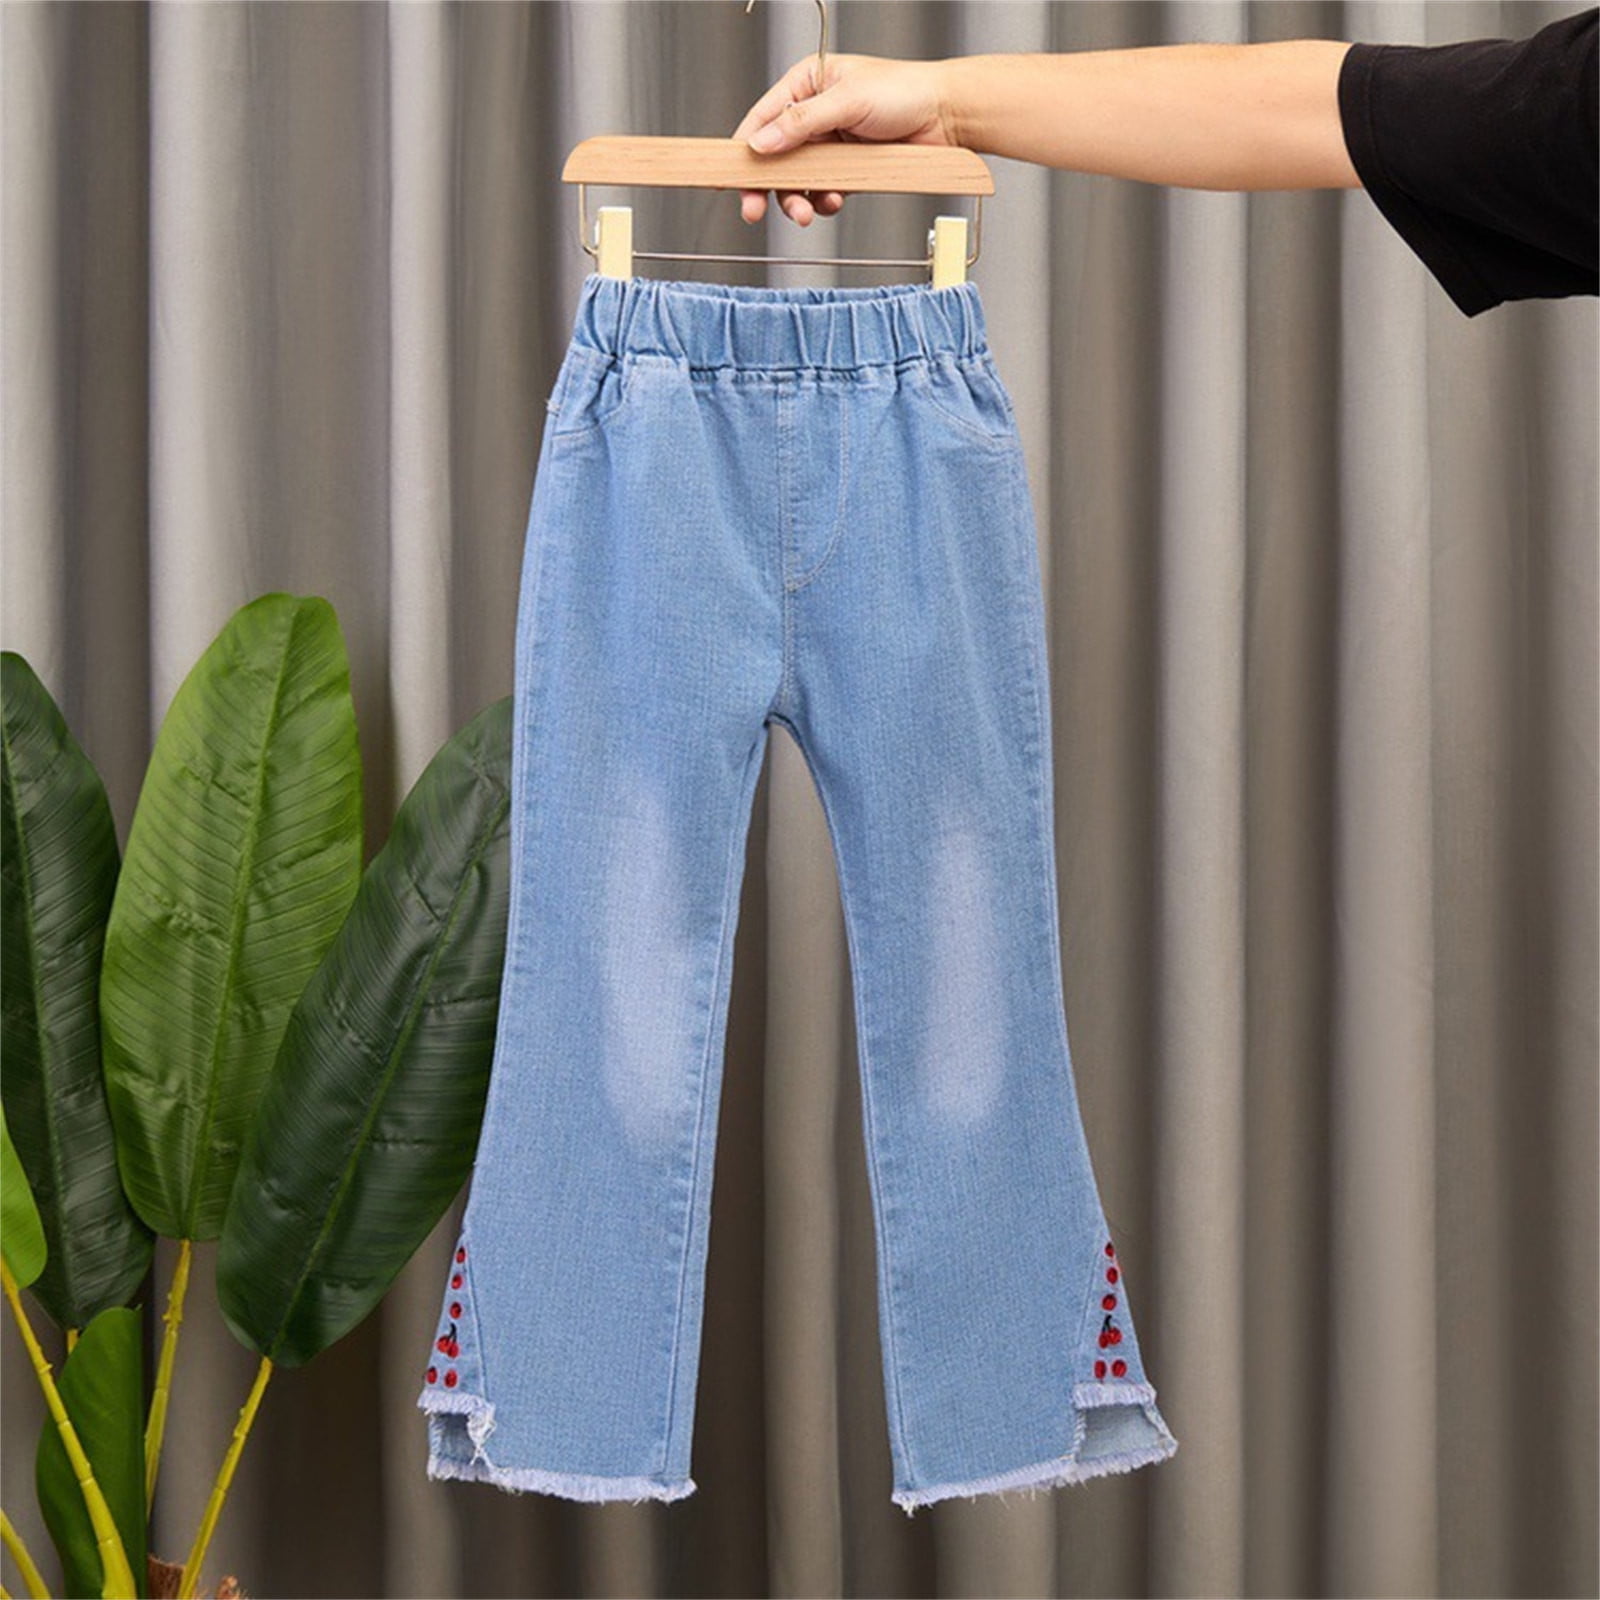 Baby Delas!2-13 Years Girls Flare Jeans,Girls Baggy Flare Pants,Bootcut  Jeans for Girls,Flare Jeans Girls,Toddler Jeans Girls,Toddler Bootcut Jeans,Girls  Flared Wide Leg Jeans